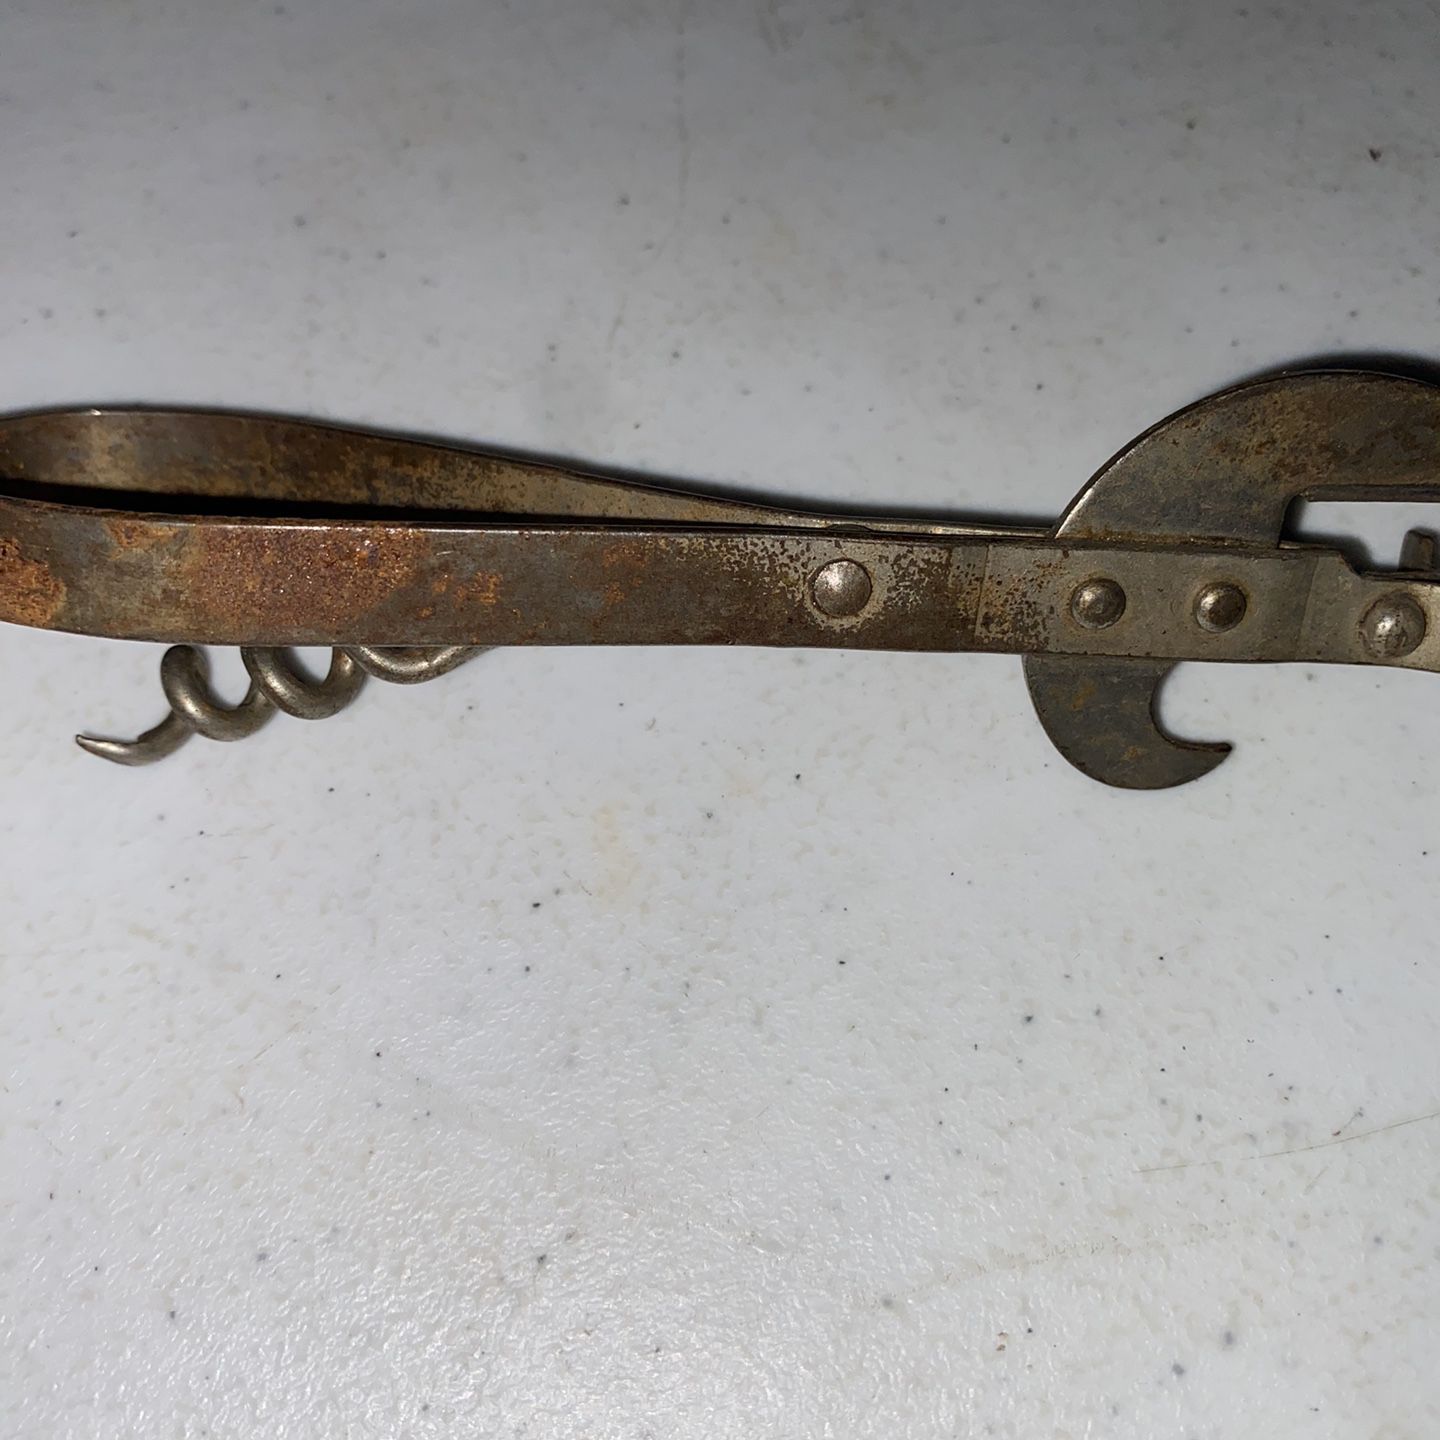 RARE Vintage DIXIE Can Opener Bottle Opener Corkscrew 1930s for Sale in  Ontario, CA - OfferUp